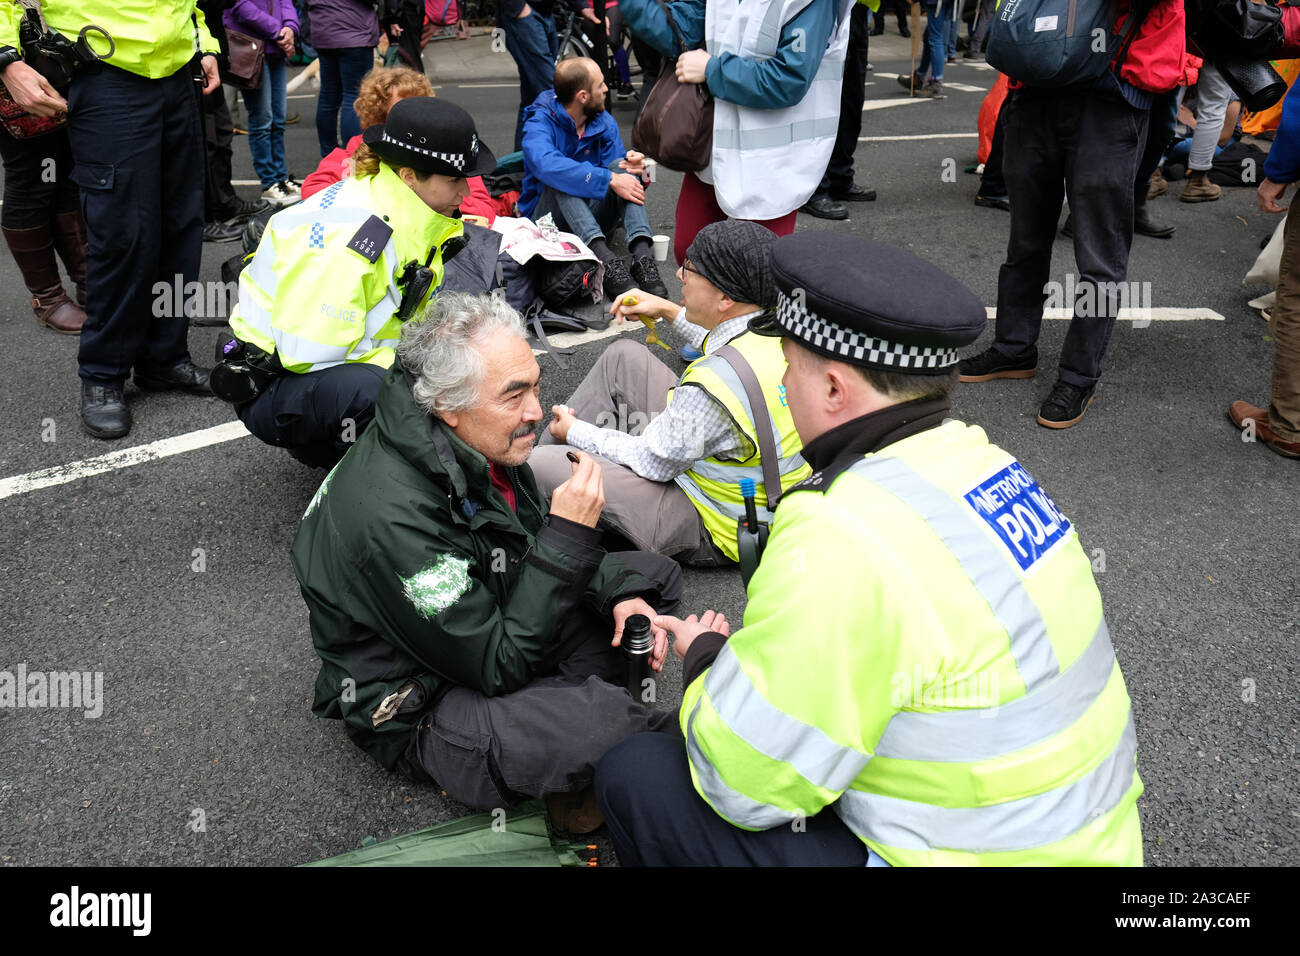 Westminster, London, UK - Monday 7th October 2019 - Extinction Rebellion XR climate protesters block roads around Westminster - Police officers warn a protester of imminent arrest at Millbank near Parliament. Photo Steven May / Alamy Live News Stock Photo